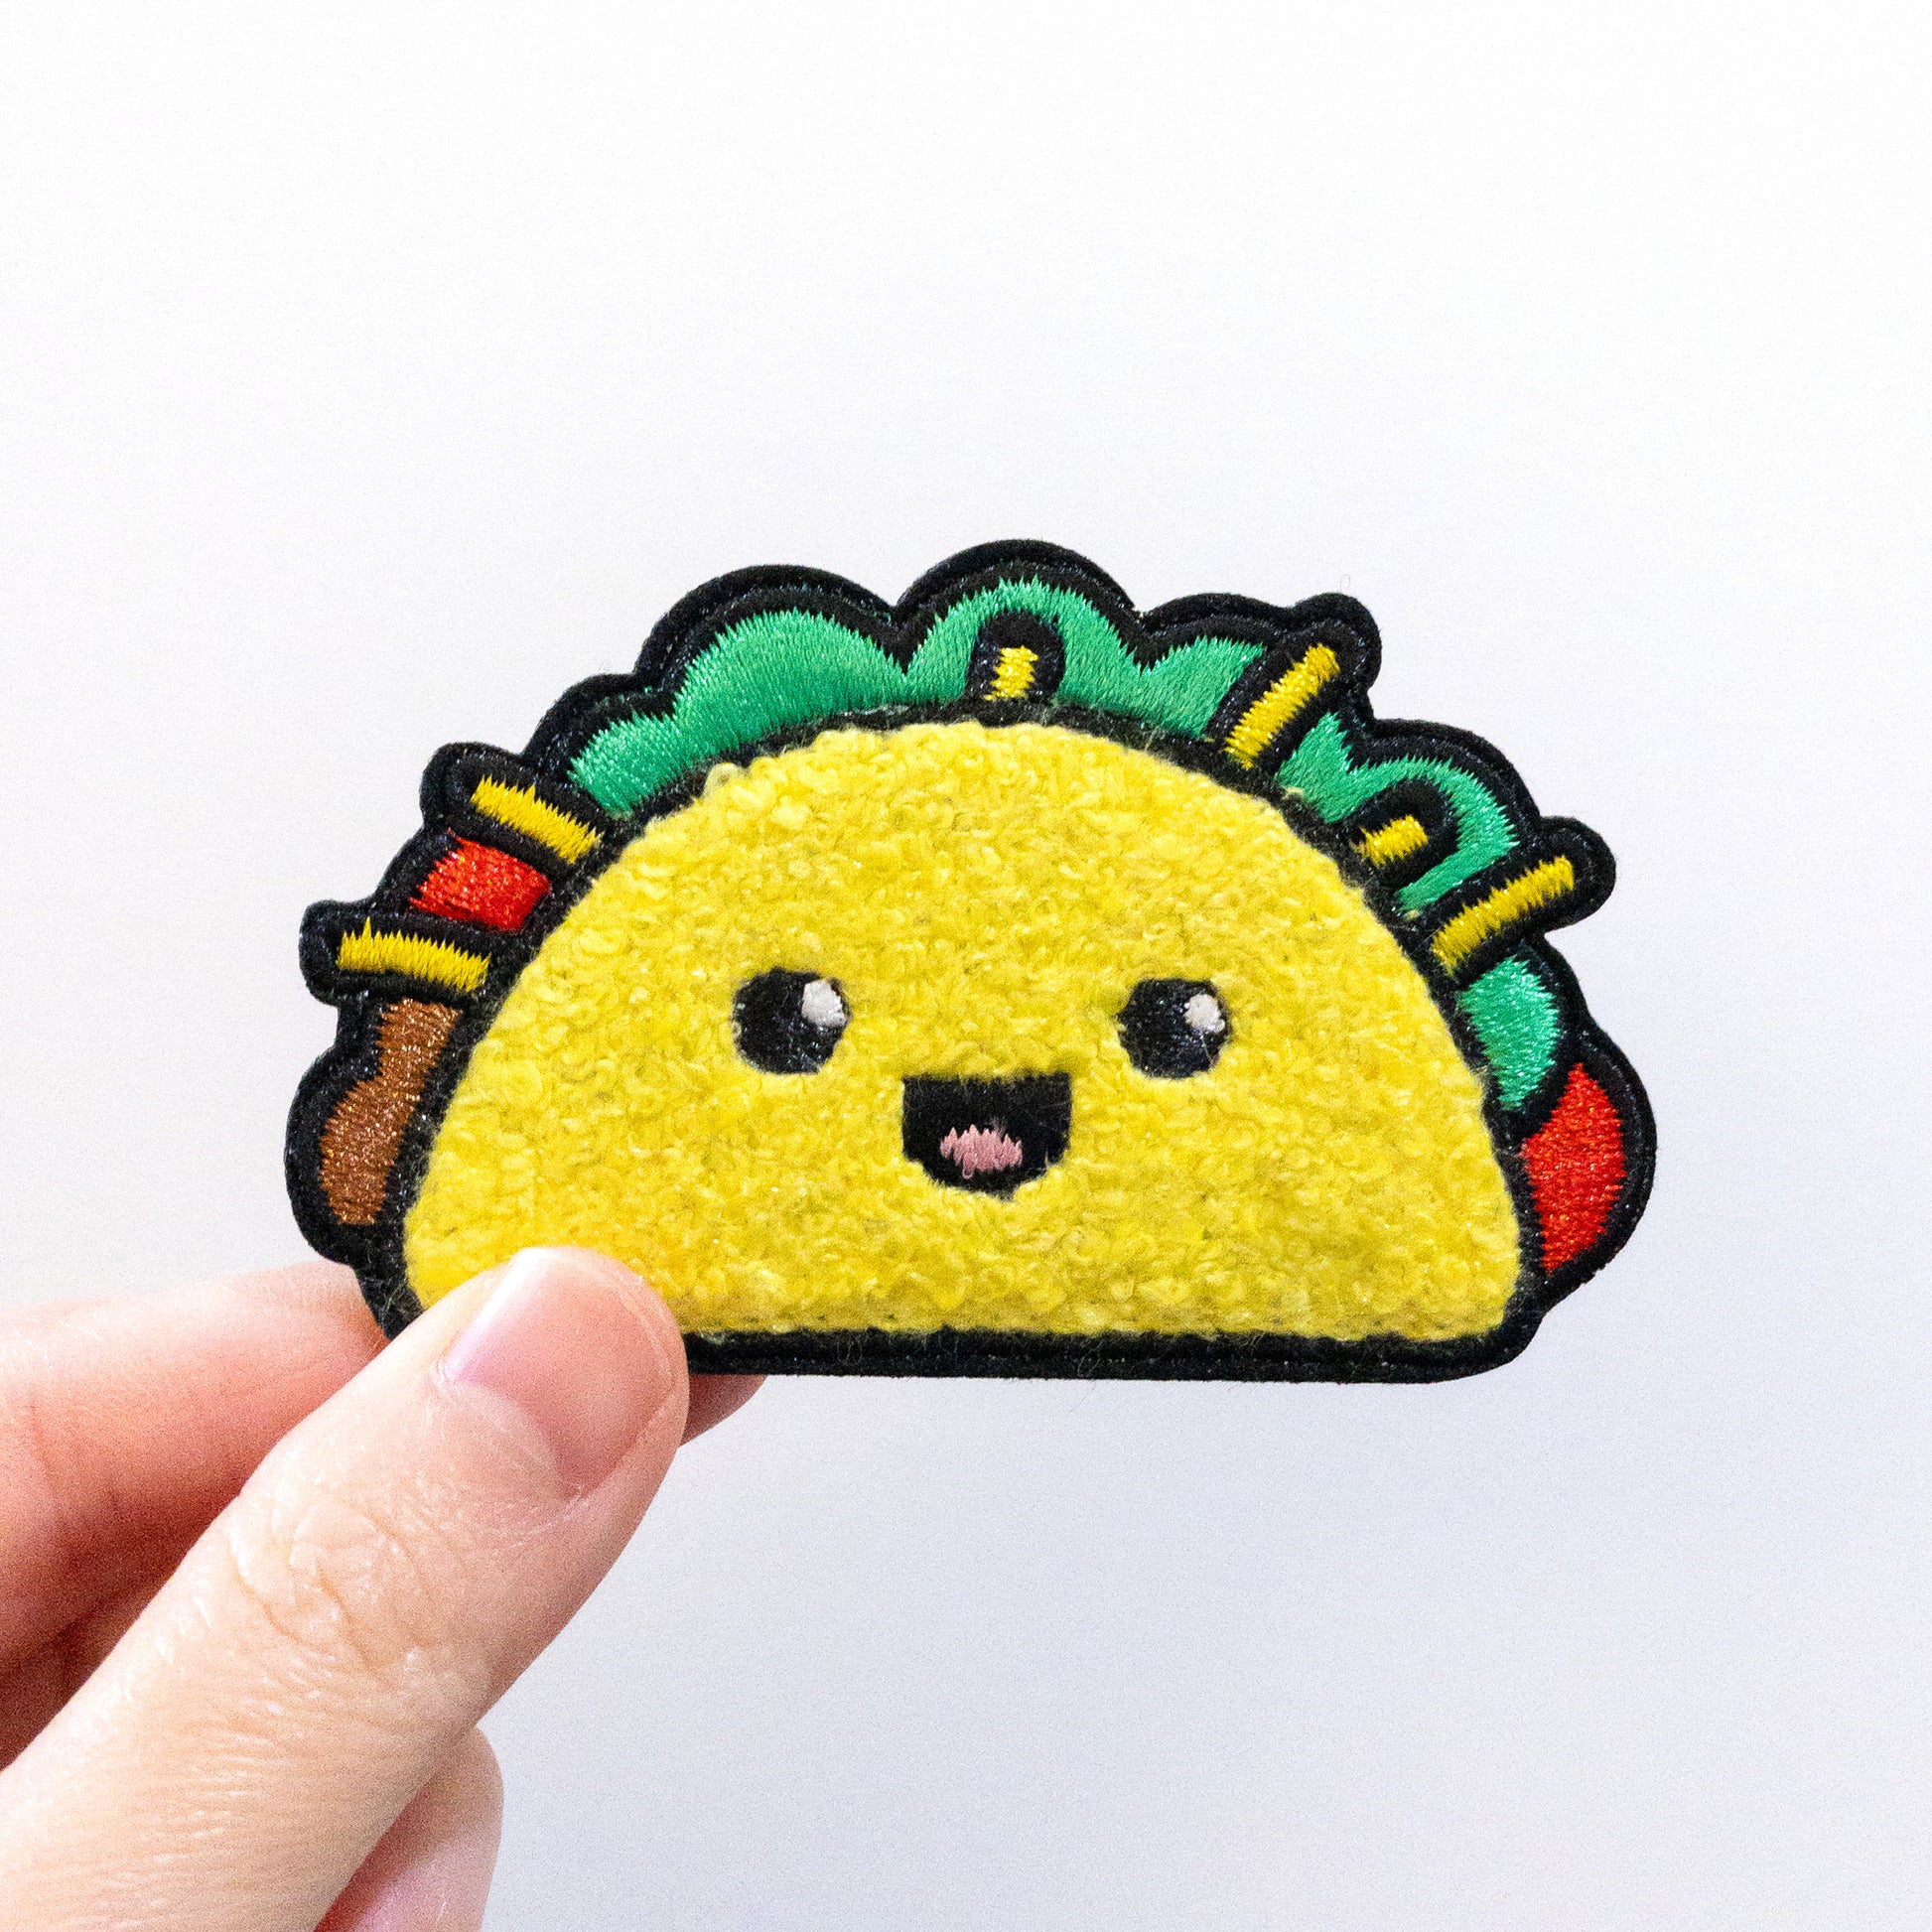 Hand holding a Taco iron on chenille patch